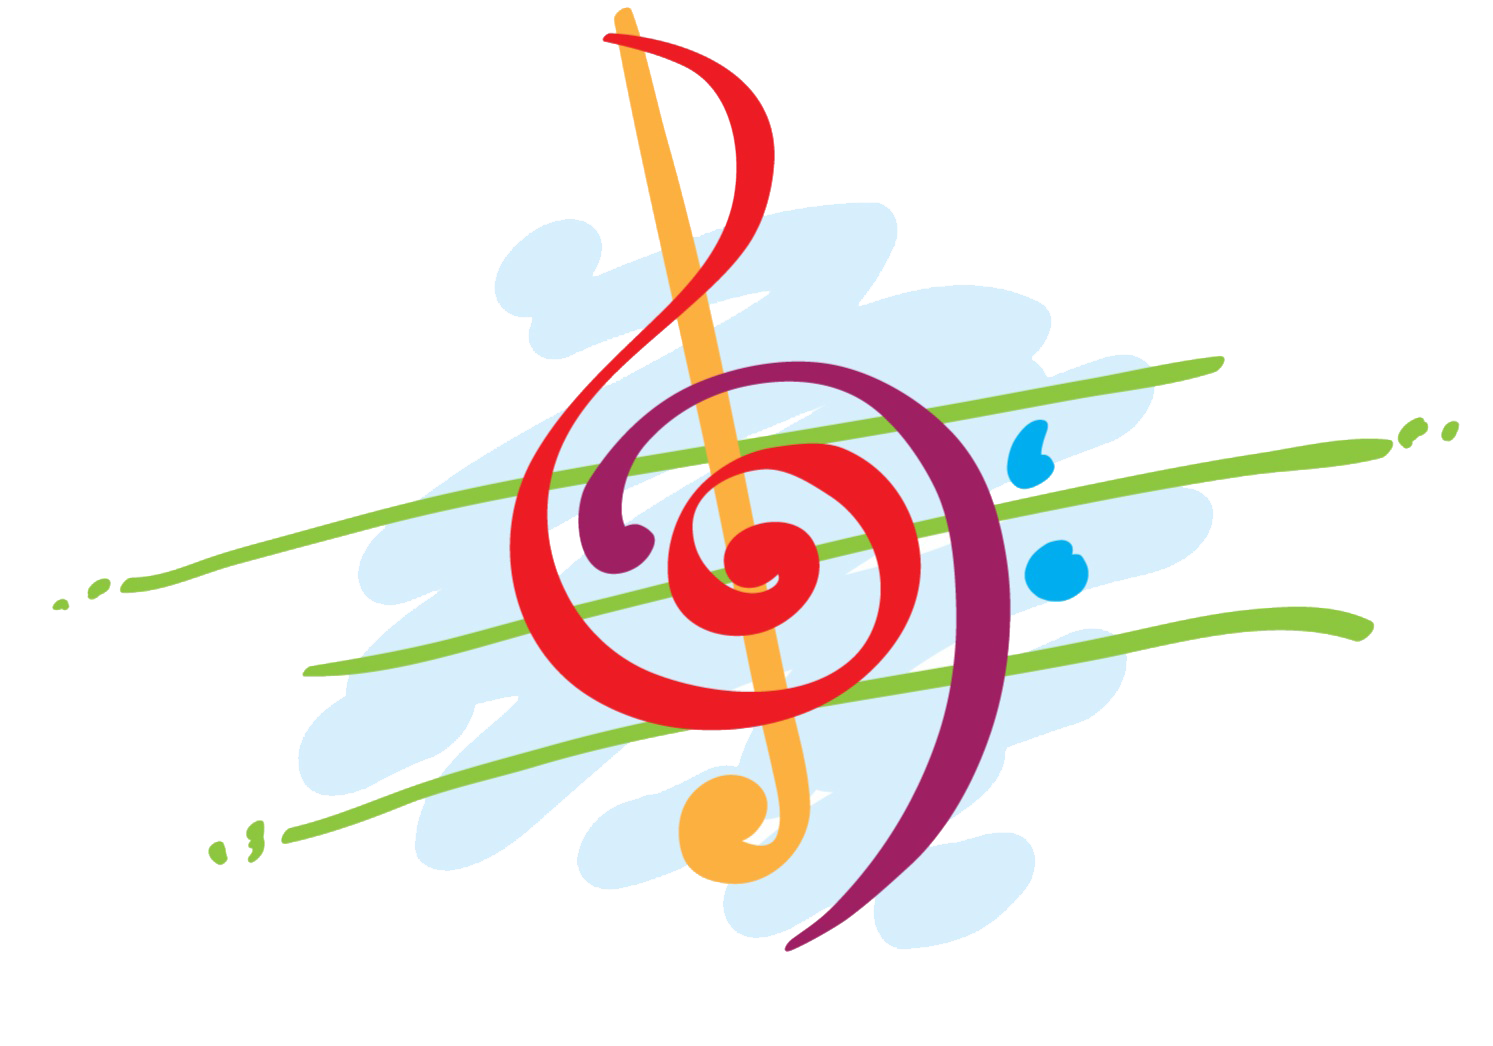 Colorful Musical Notes Png   Clipart Panda   Free Clipart Images